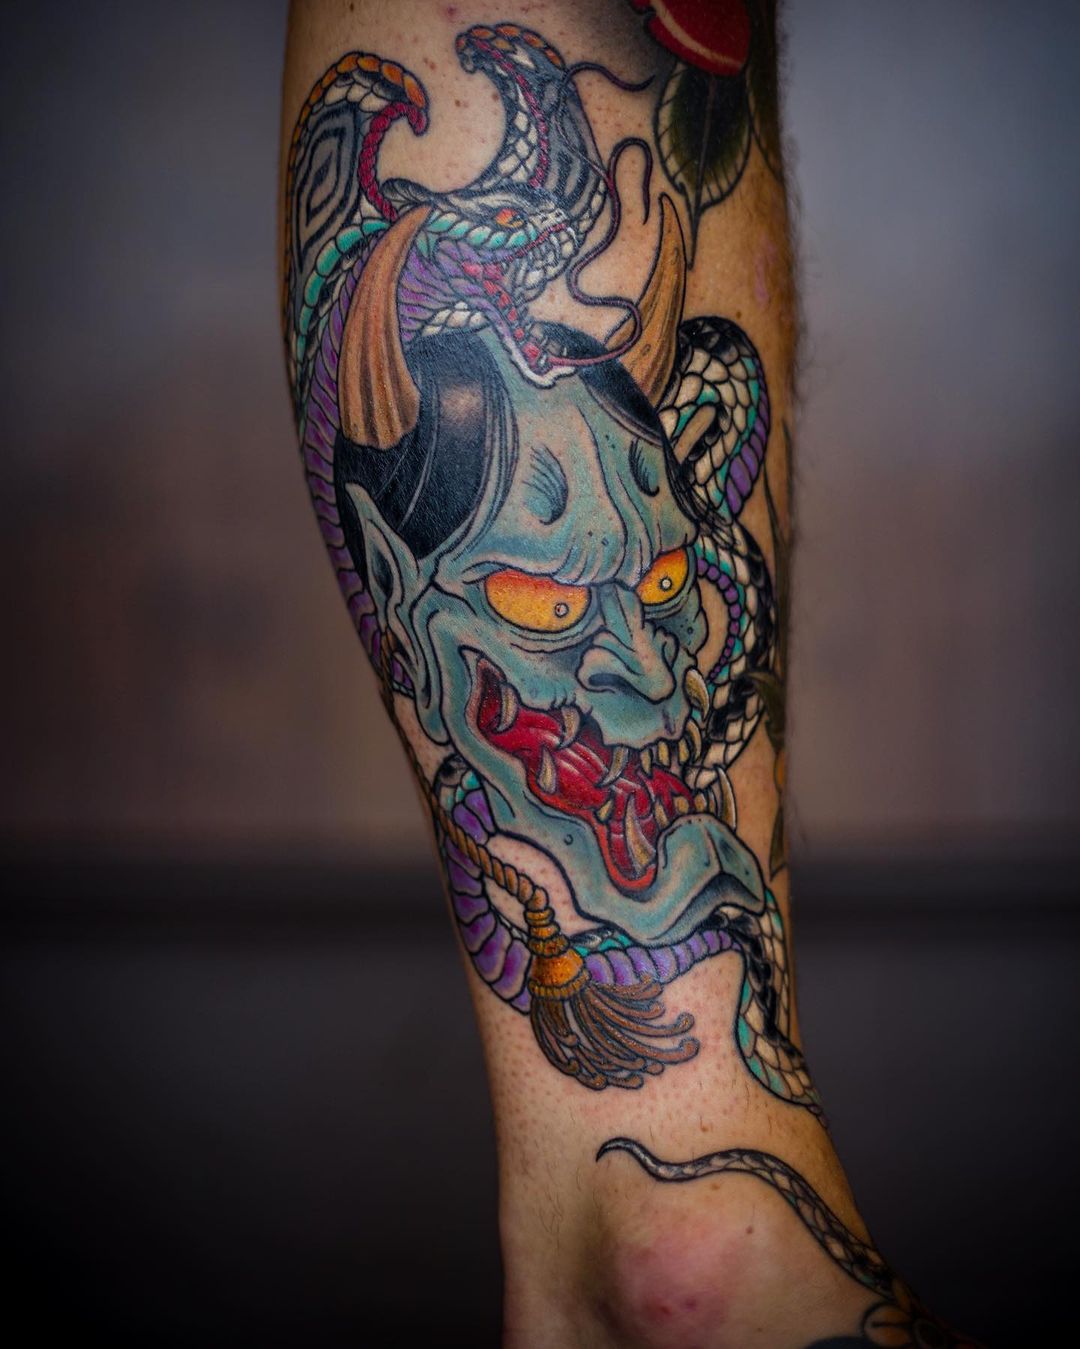 Latest addition to Ralf‘s leg and another super-fun piece! 
.
Mostly healed, par...